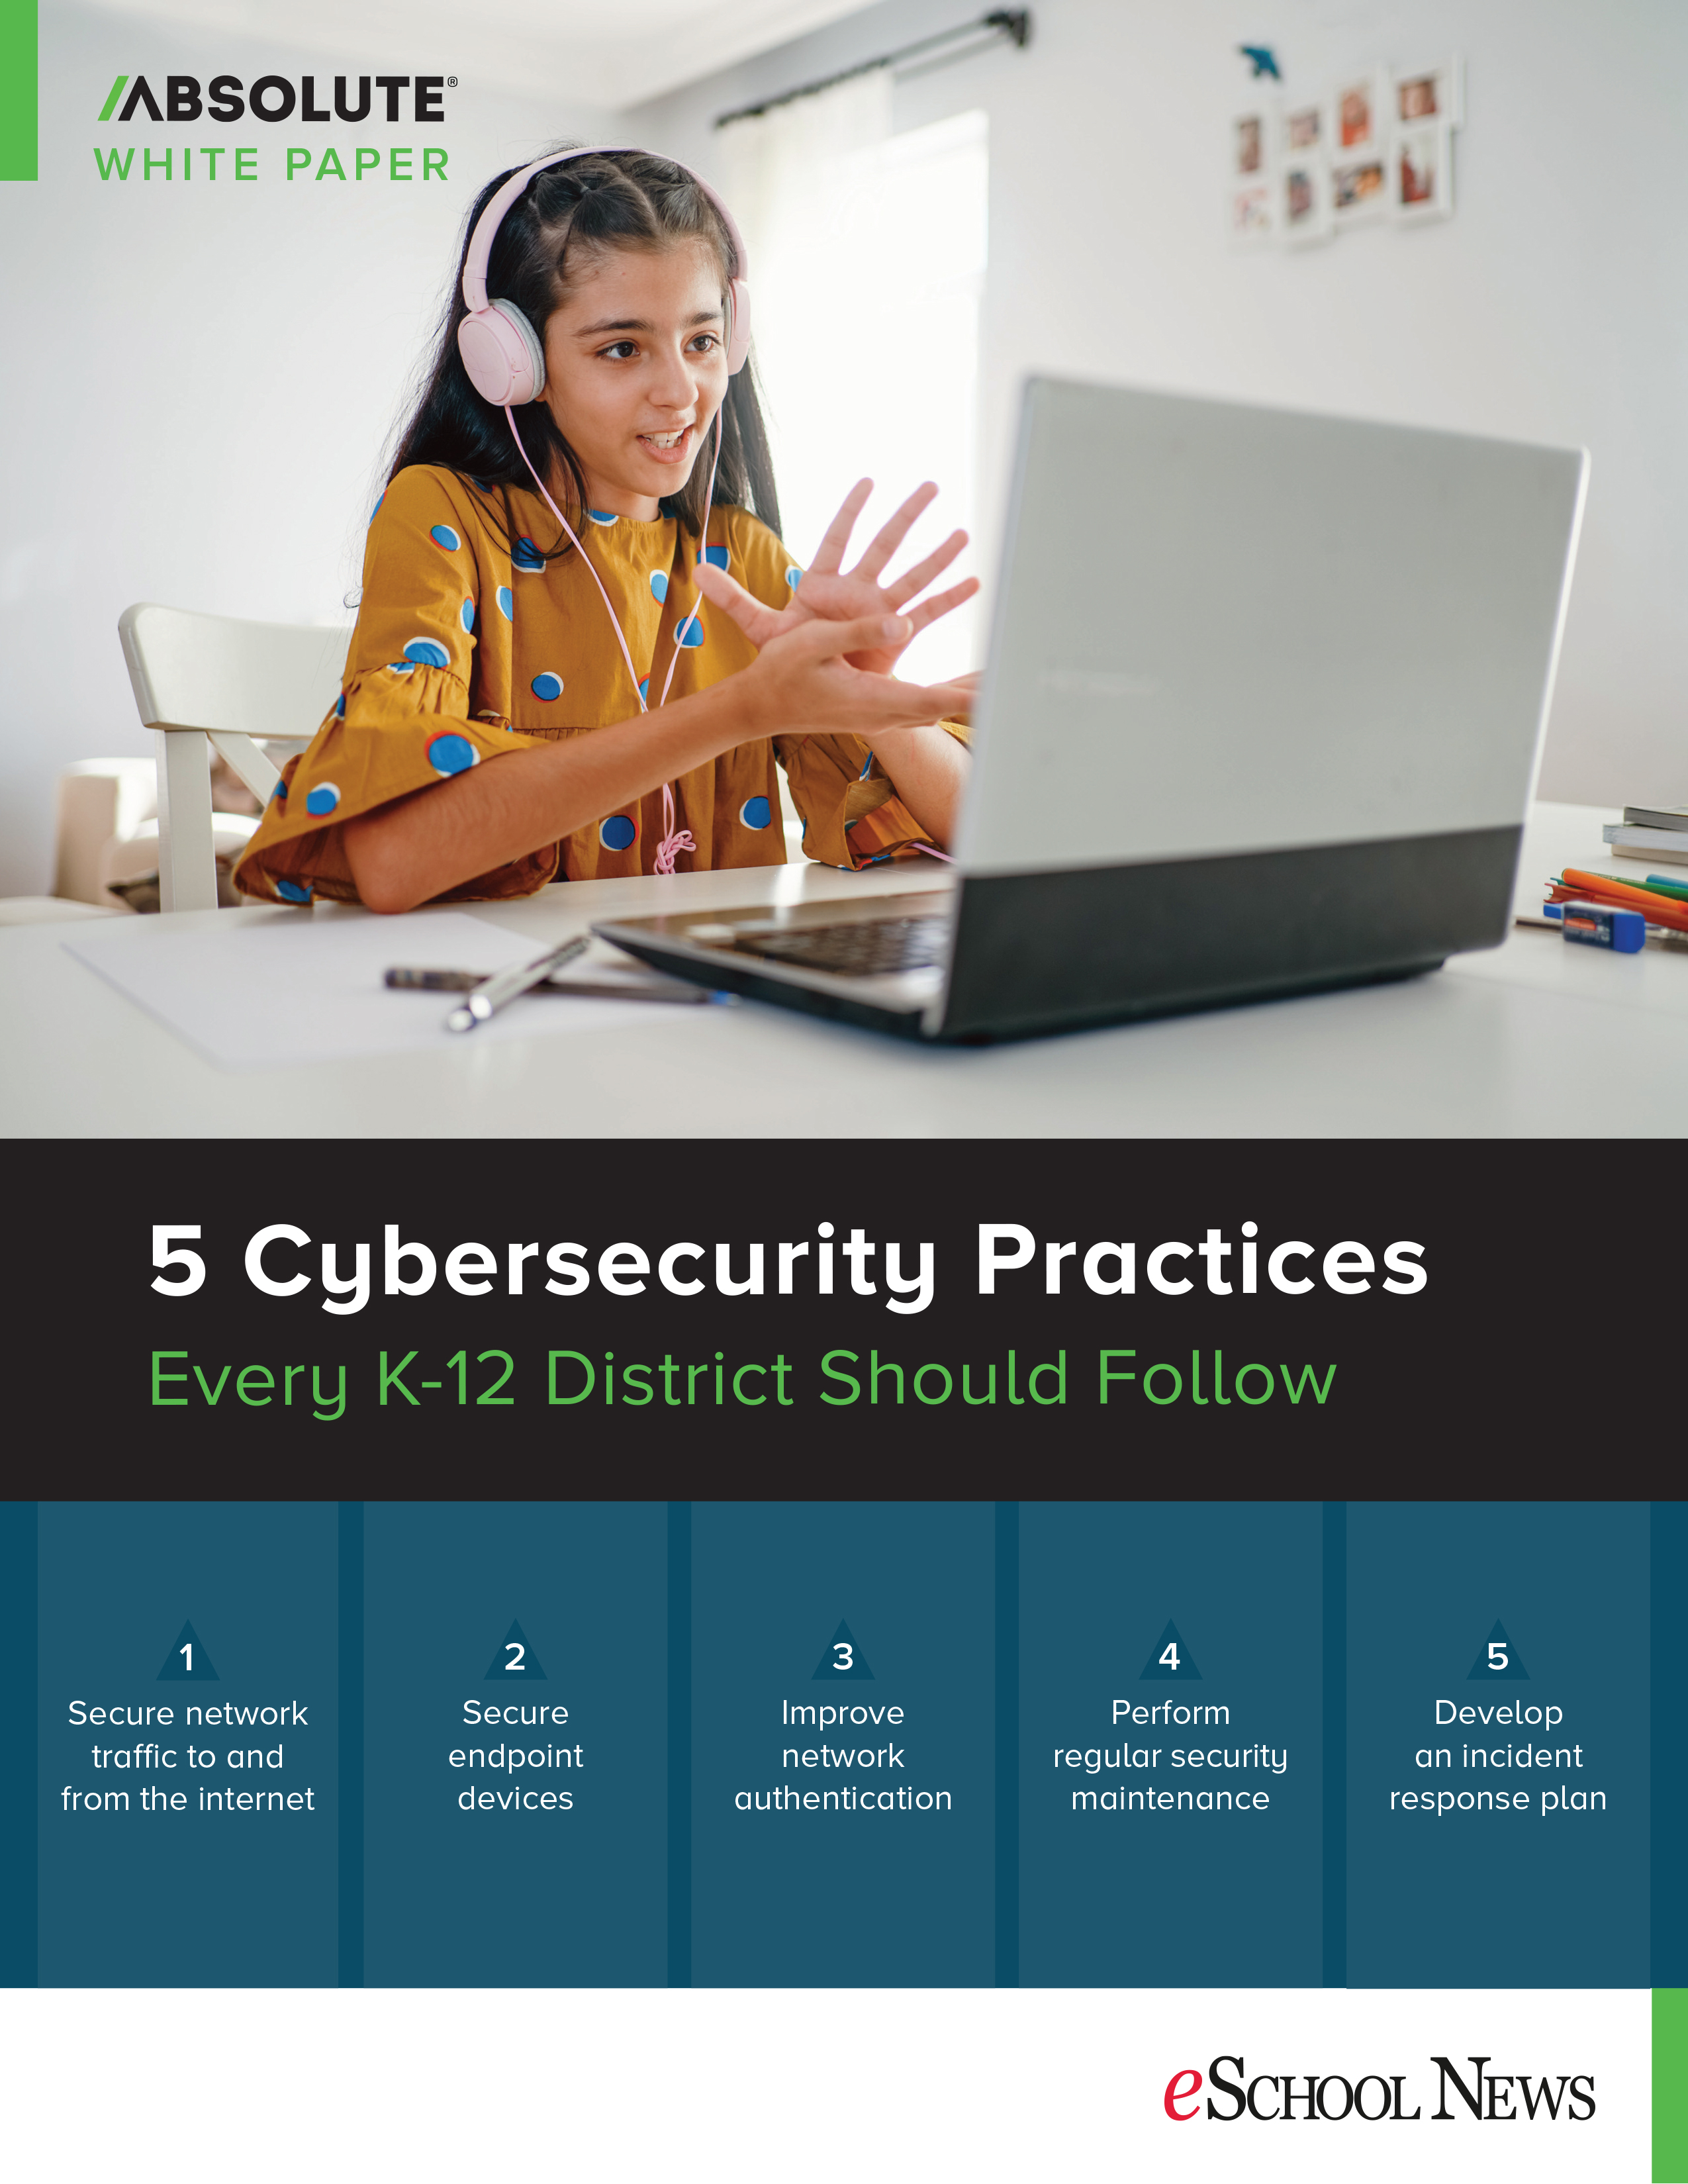 5 Cybersecurity Practices Every K-12 District Should Follow